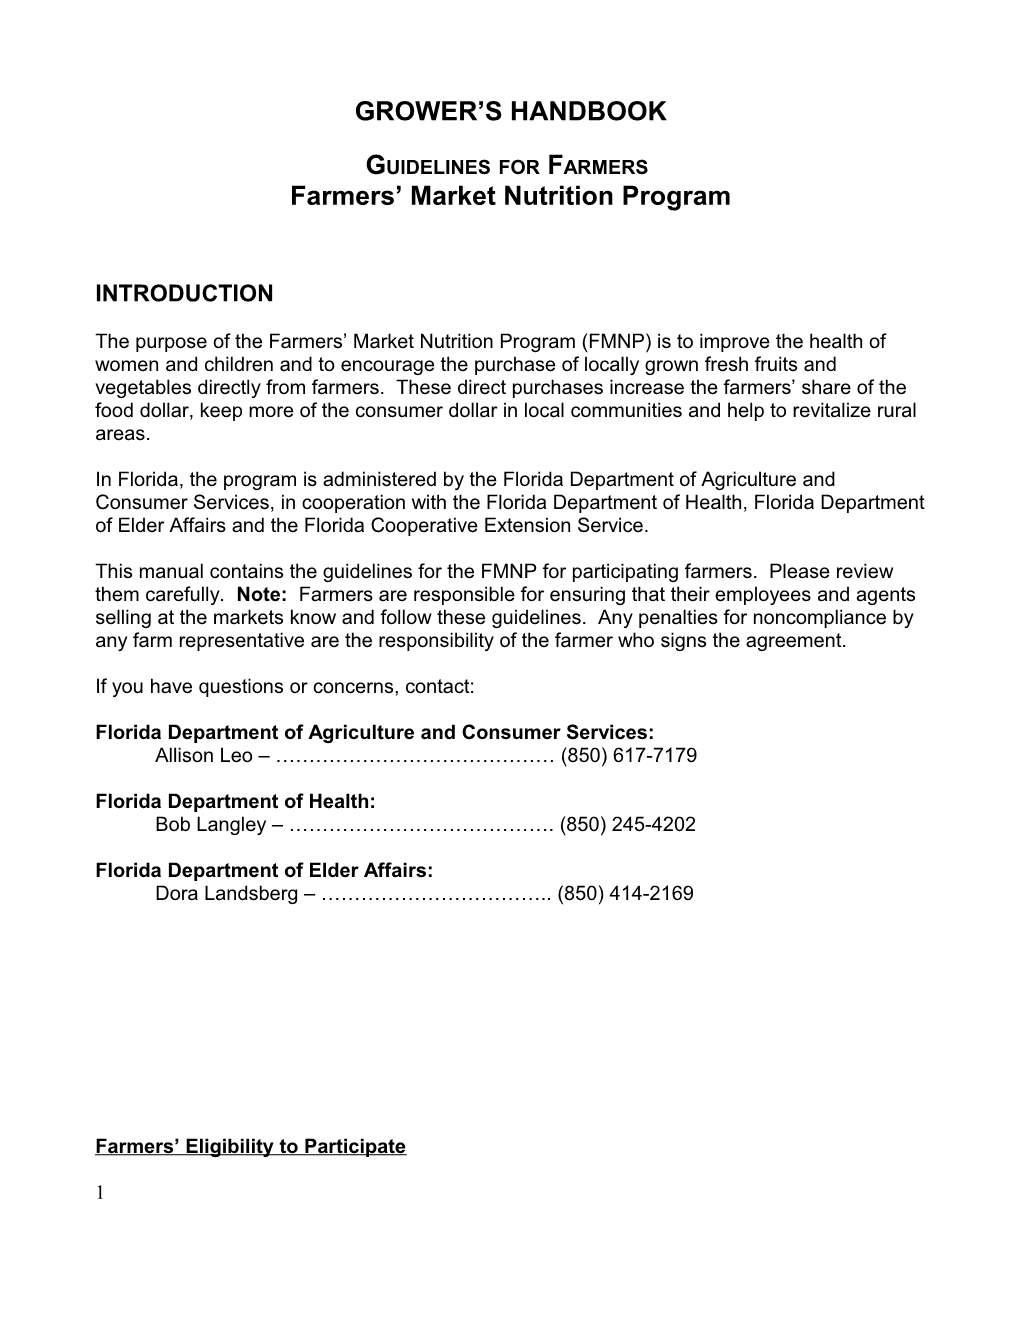 Guidelines for Farmers 1999